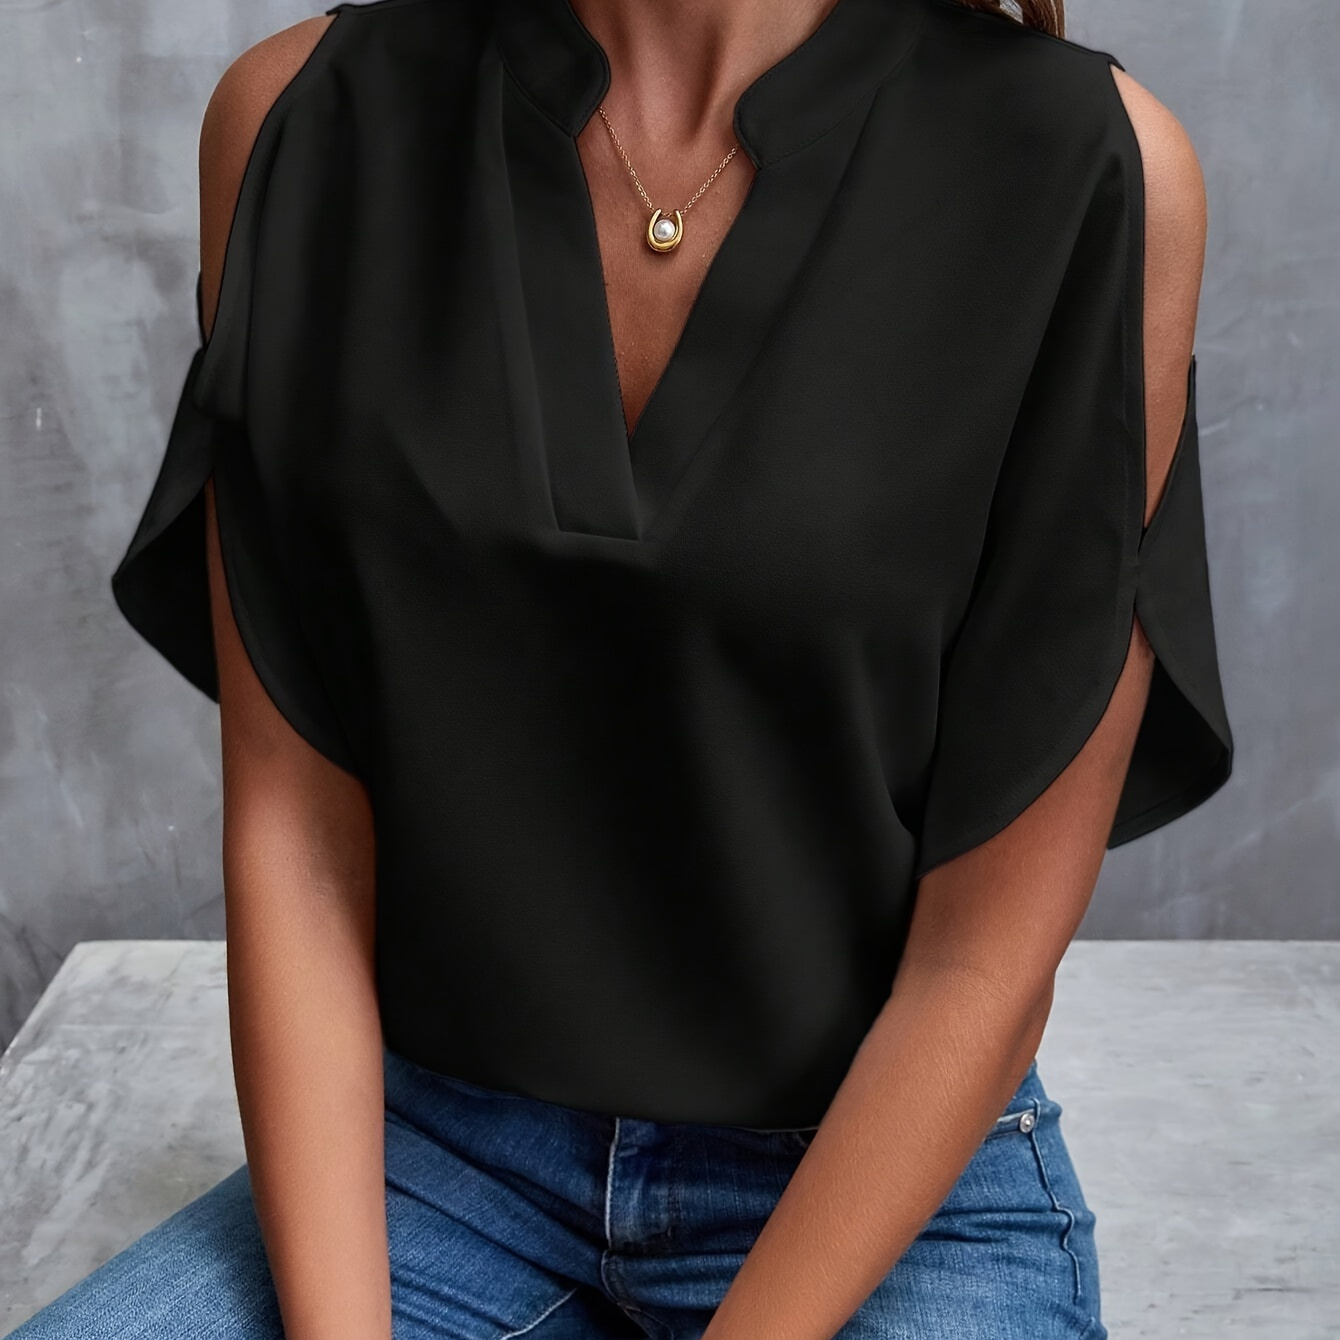 

Women's Casual V-neck Blouse With Cut-out Shoulder Detail, Dressy Summer Top For Business Or Casual Wear